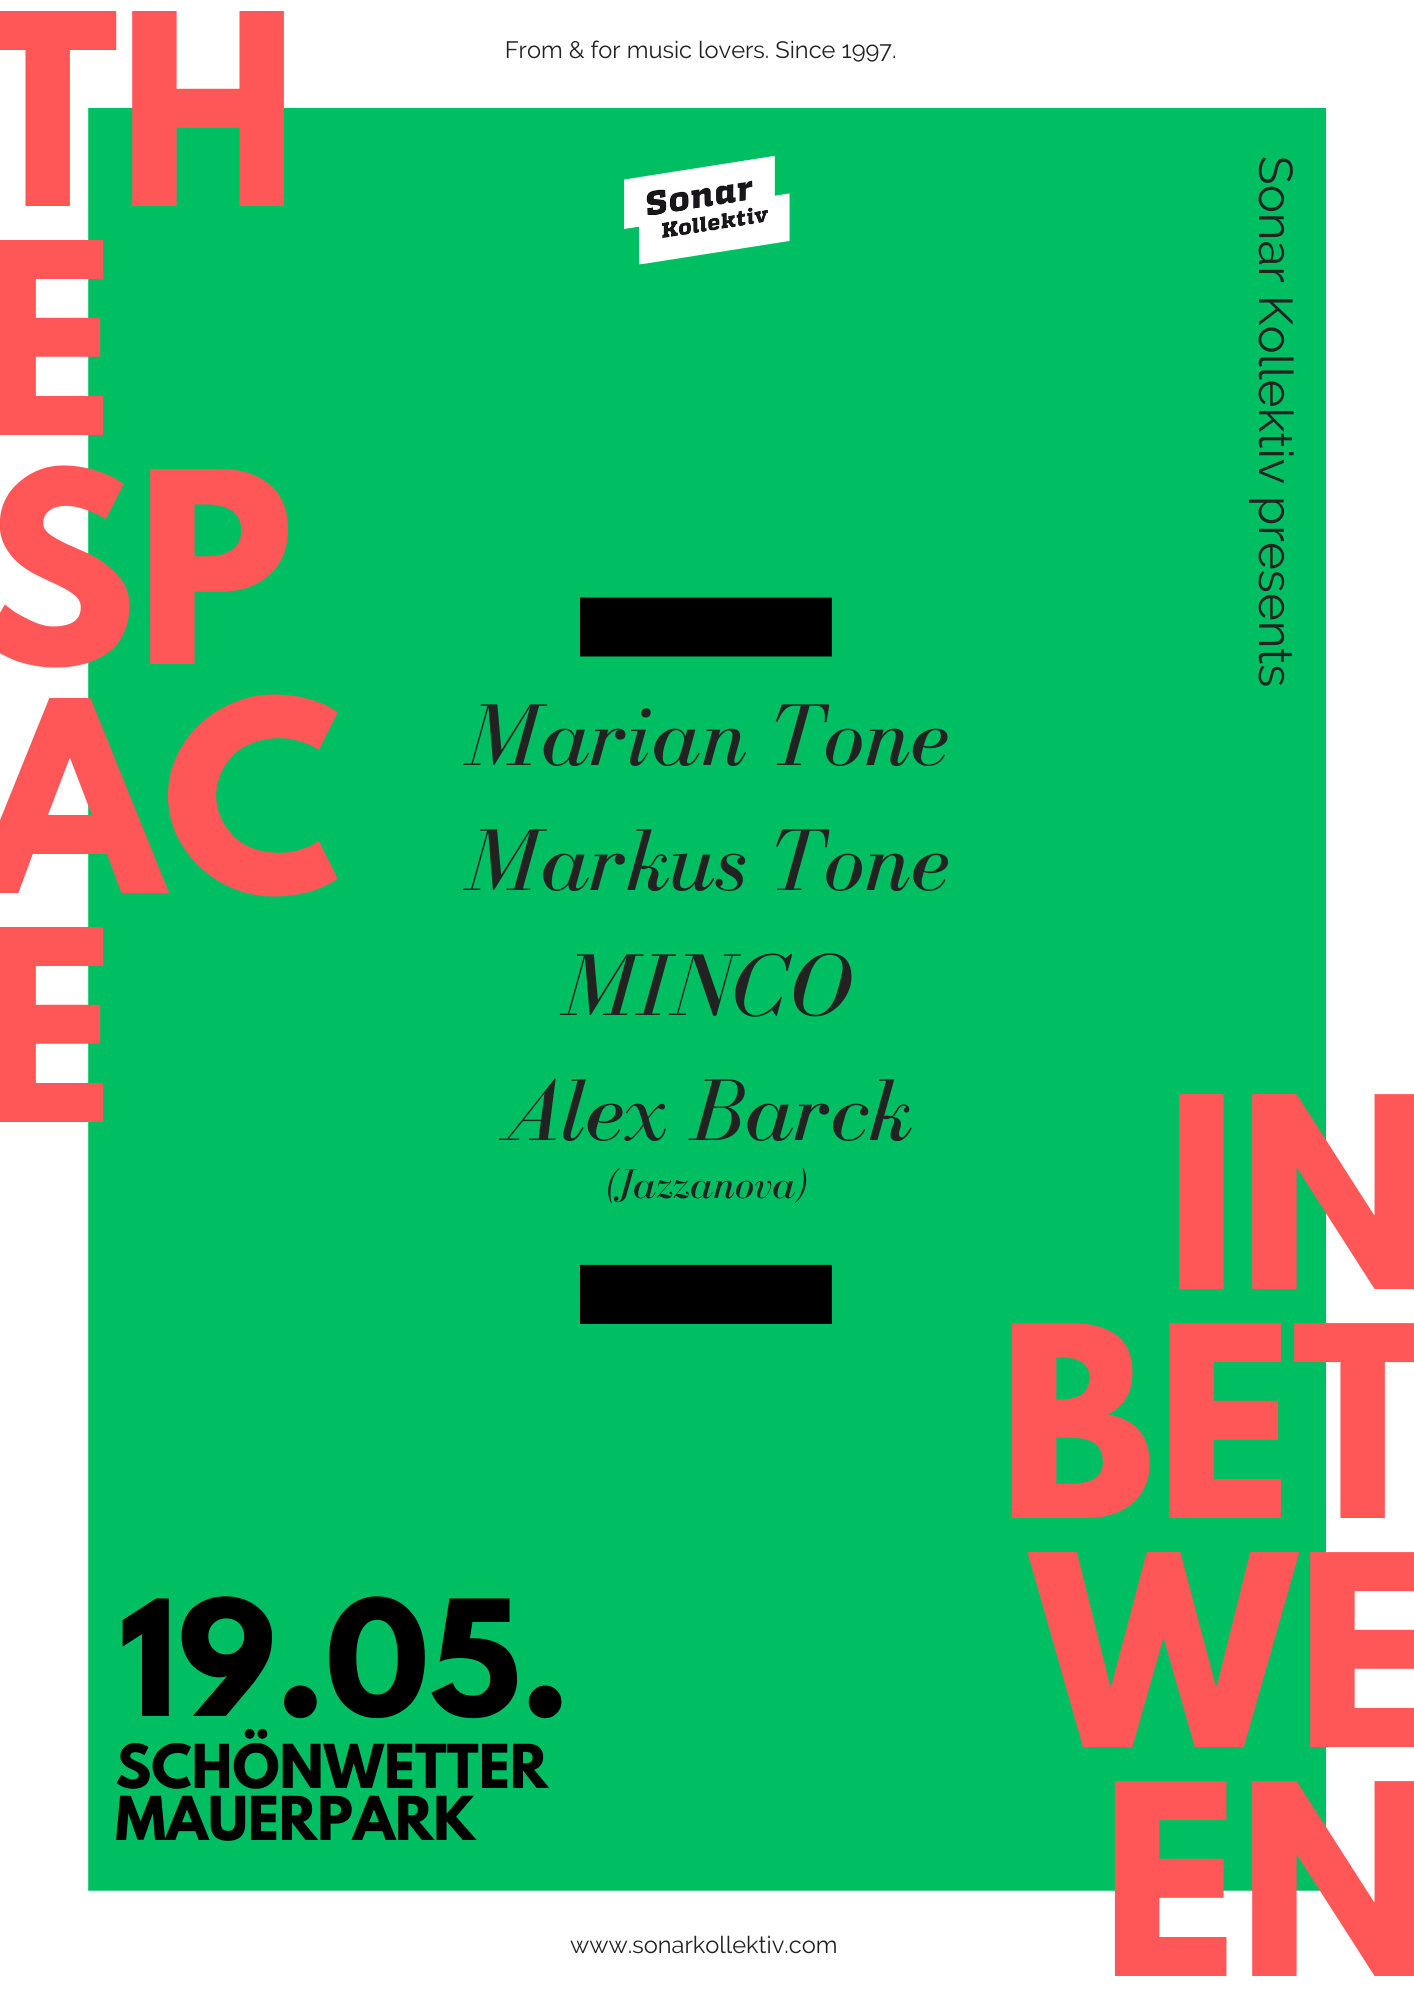 The Space In Between w / MINCO, Alex Barck, Marian & Markus Tone - Página frontal